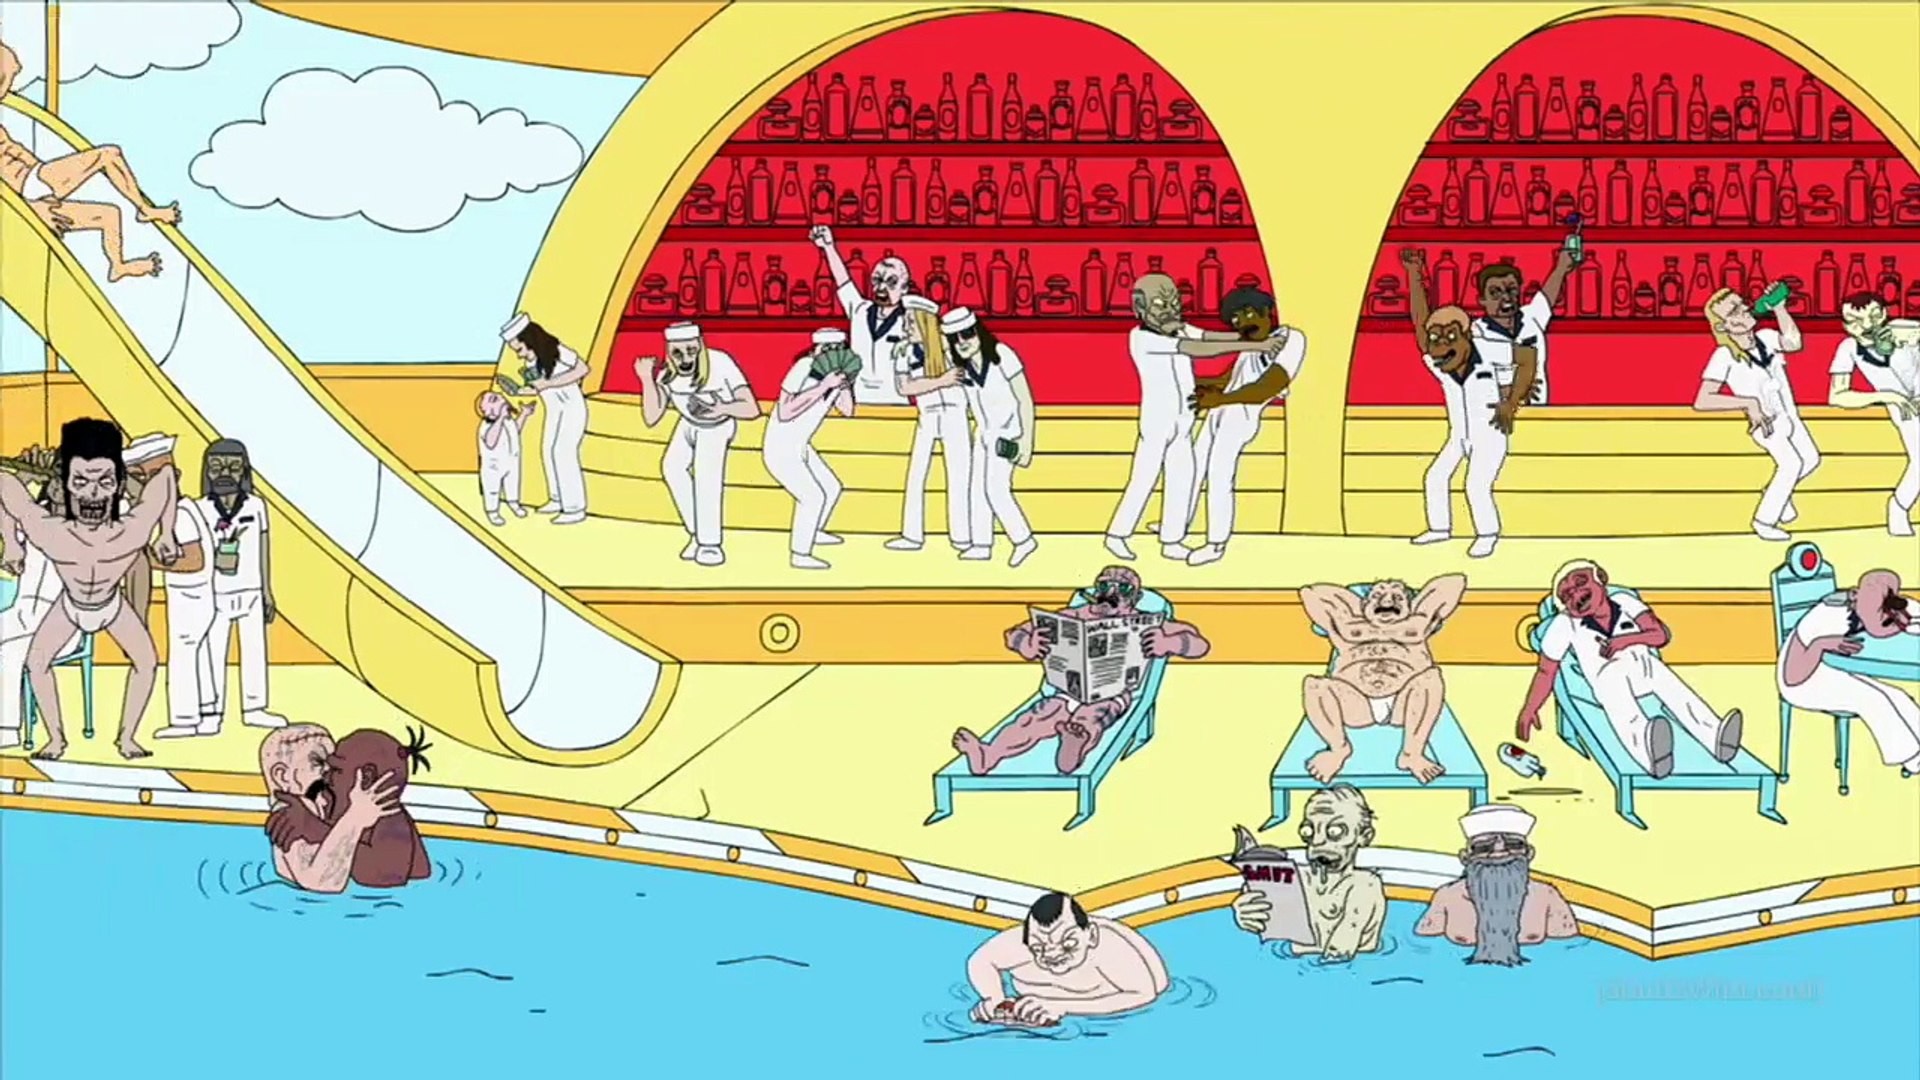 1920x1080 Superjail! S02E09 Vaction (1280x720) [Phr0stY]